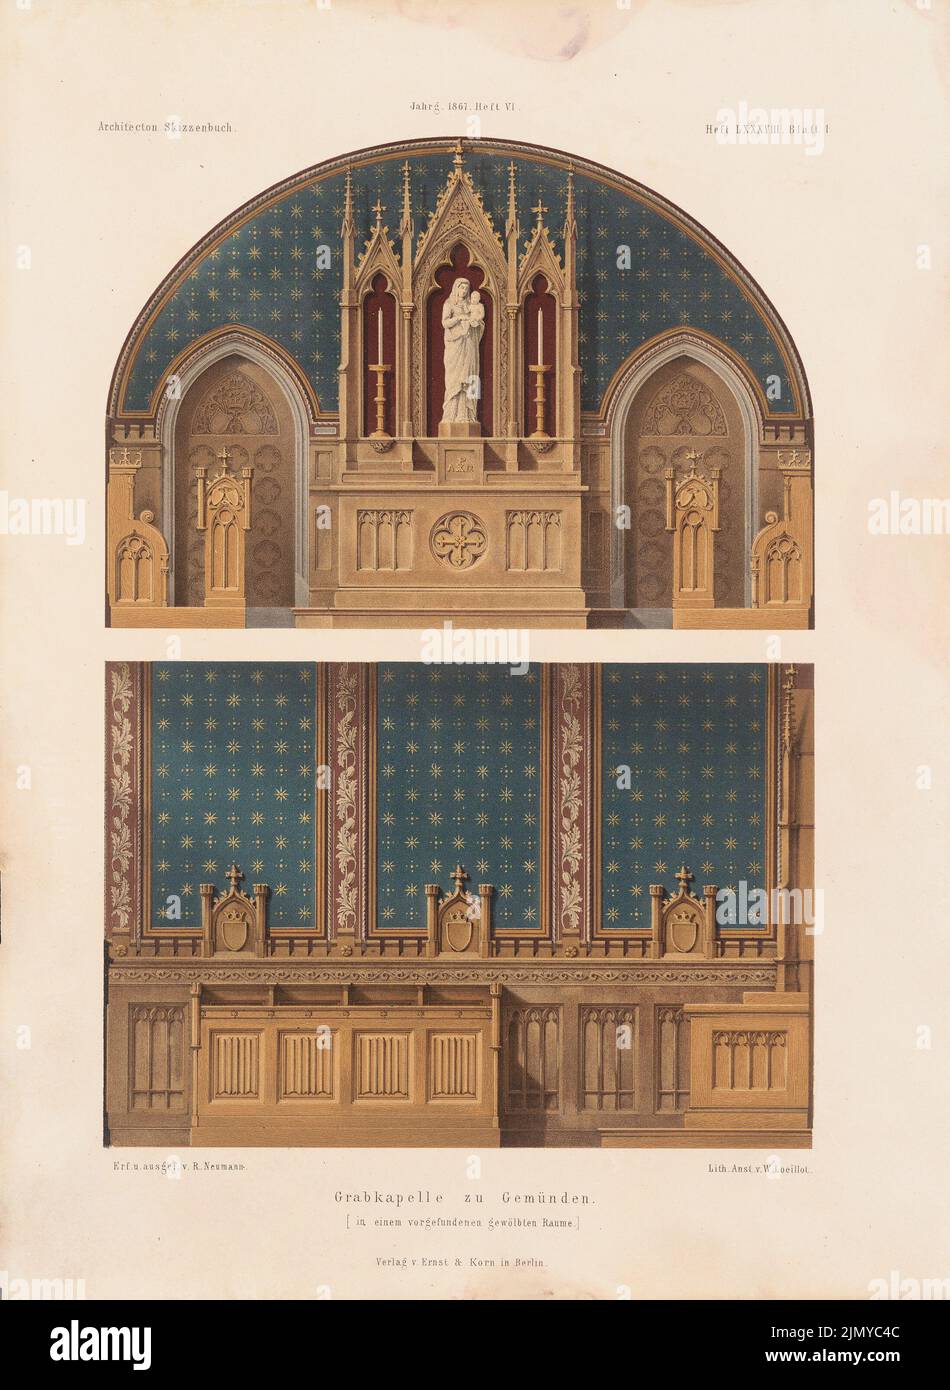 Neumann Robert (born 1823), grave chapel, Gemünden. (From: Architectural sketchbook, H. 88/6, 1867.) (1867-1867): Views Details. Lithography colored on paper, 33.9 x 24.8 cm (including scan edges) Stock Photo